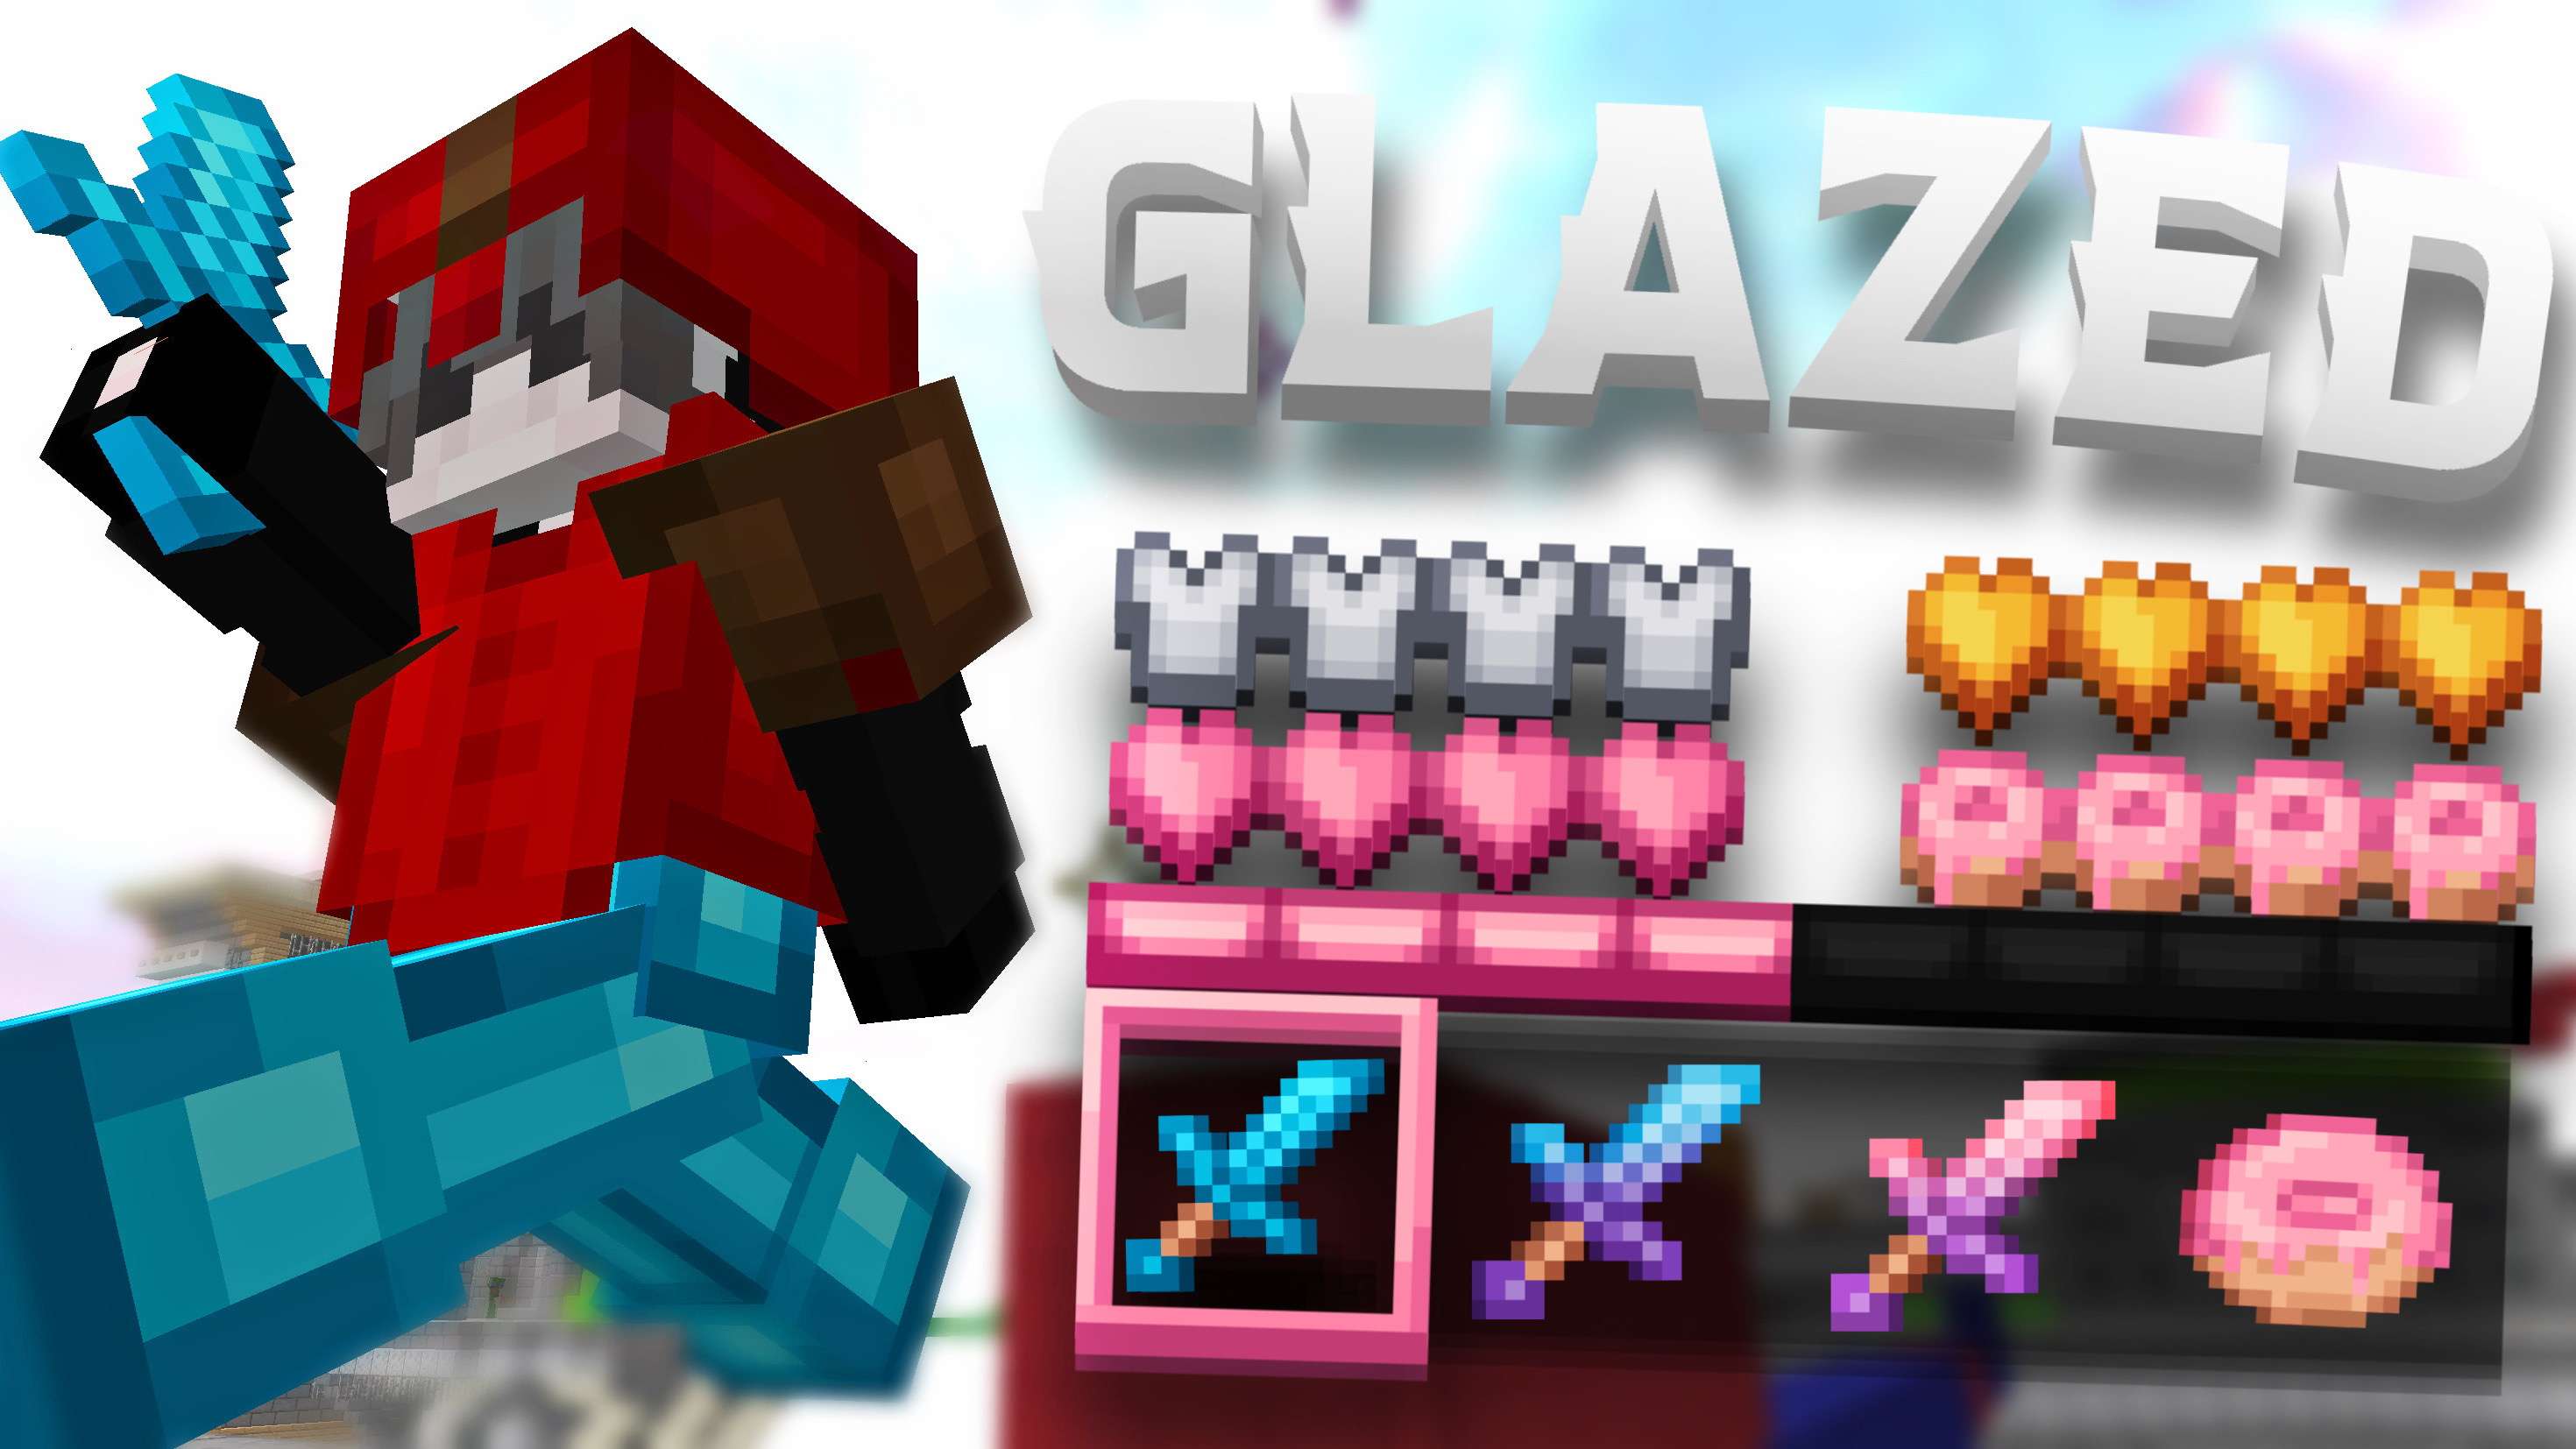 Glazed (Default) 16 by Sejer on PvPRP